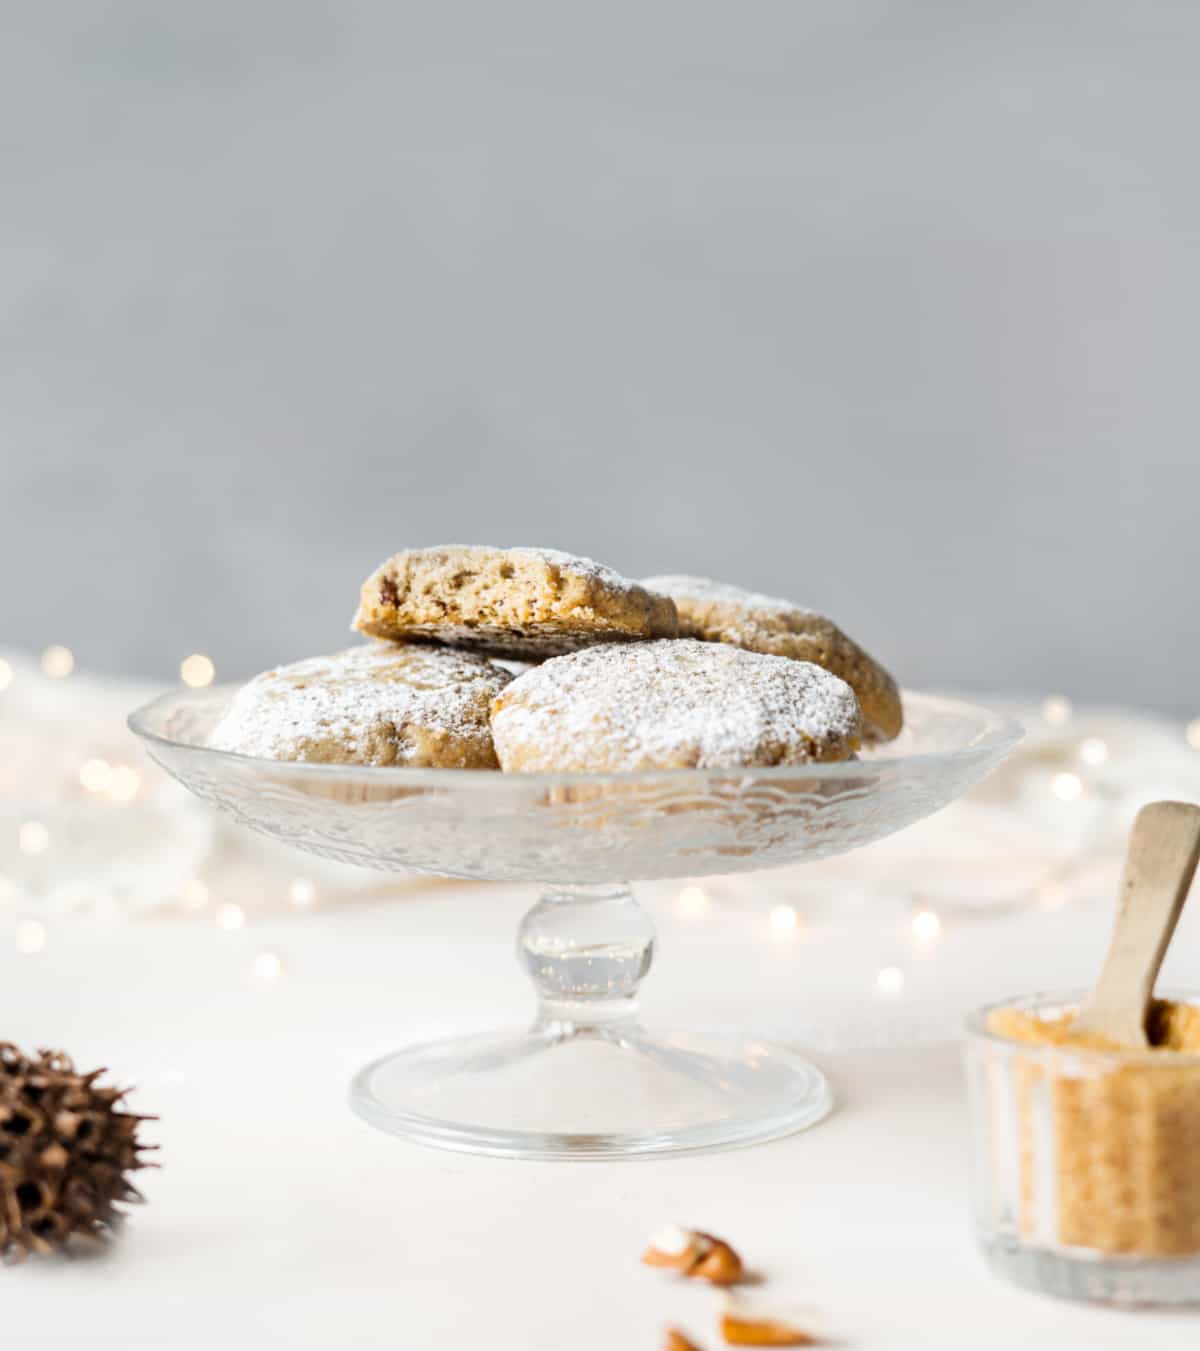 Glass cake stand with several pecan cookies with powdered sugar on a whitish surface with grey background.